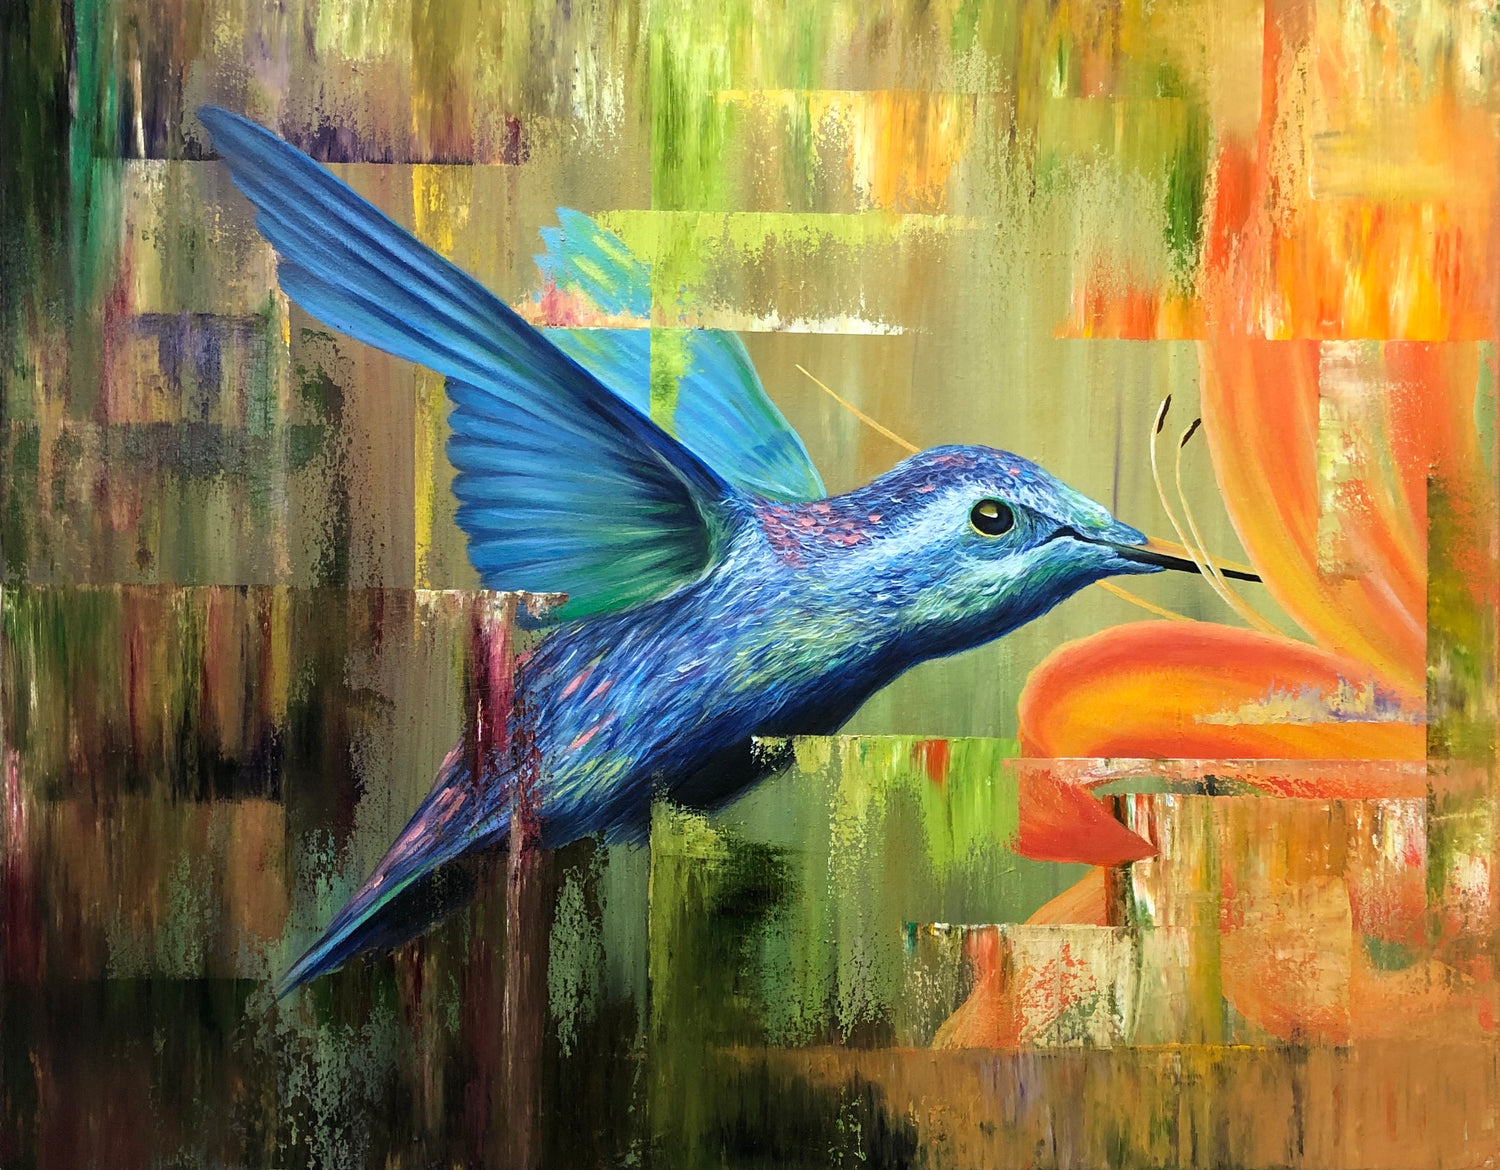 Hummingbird painting oil on canvas by Shawn Dixon